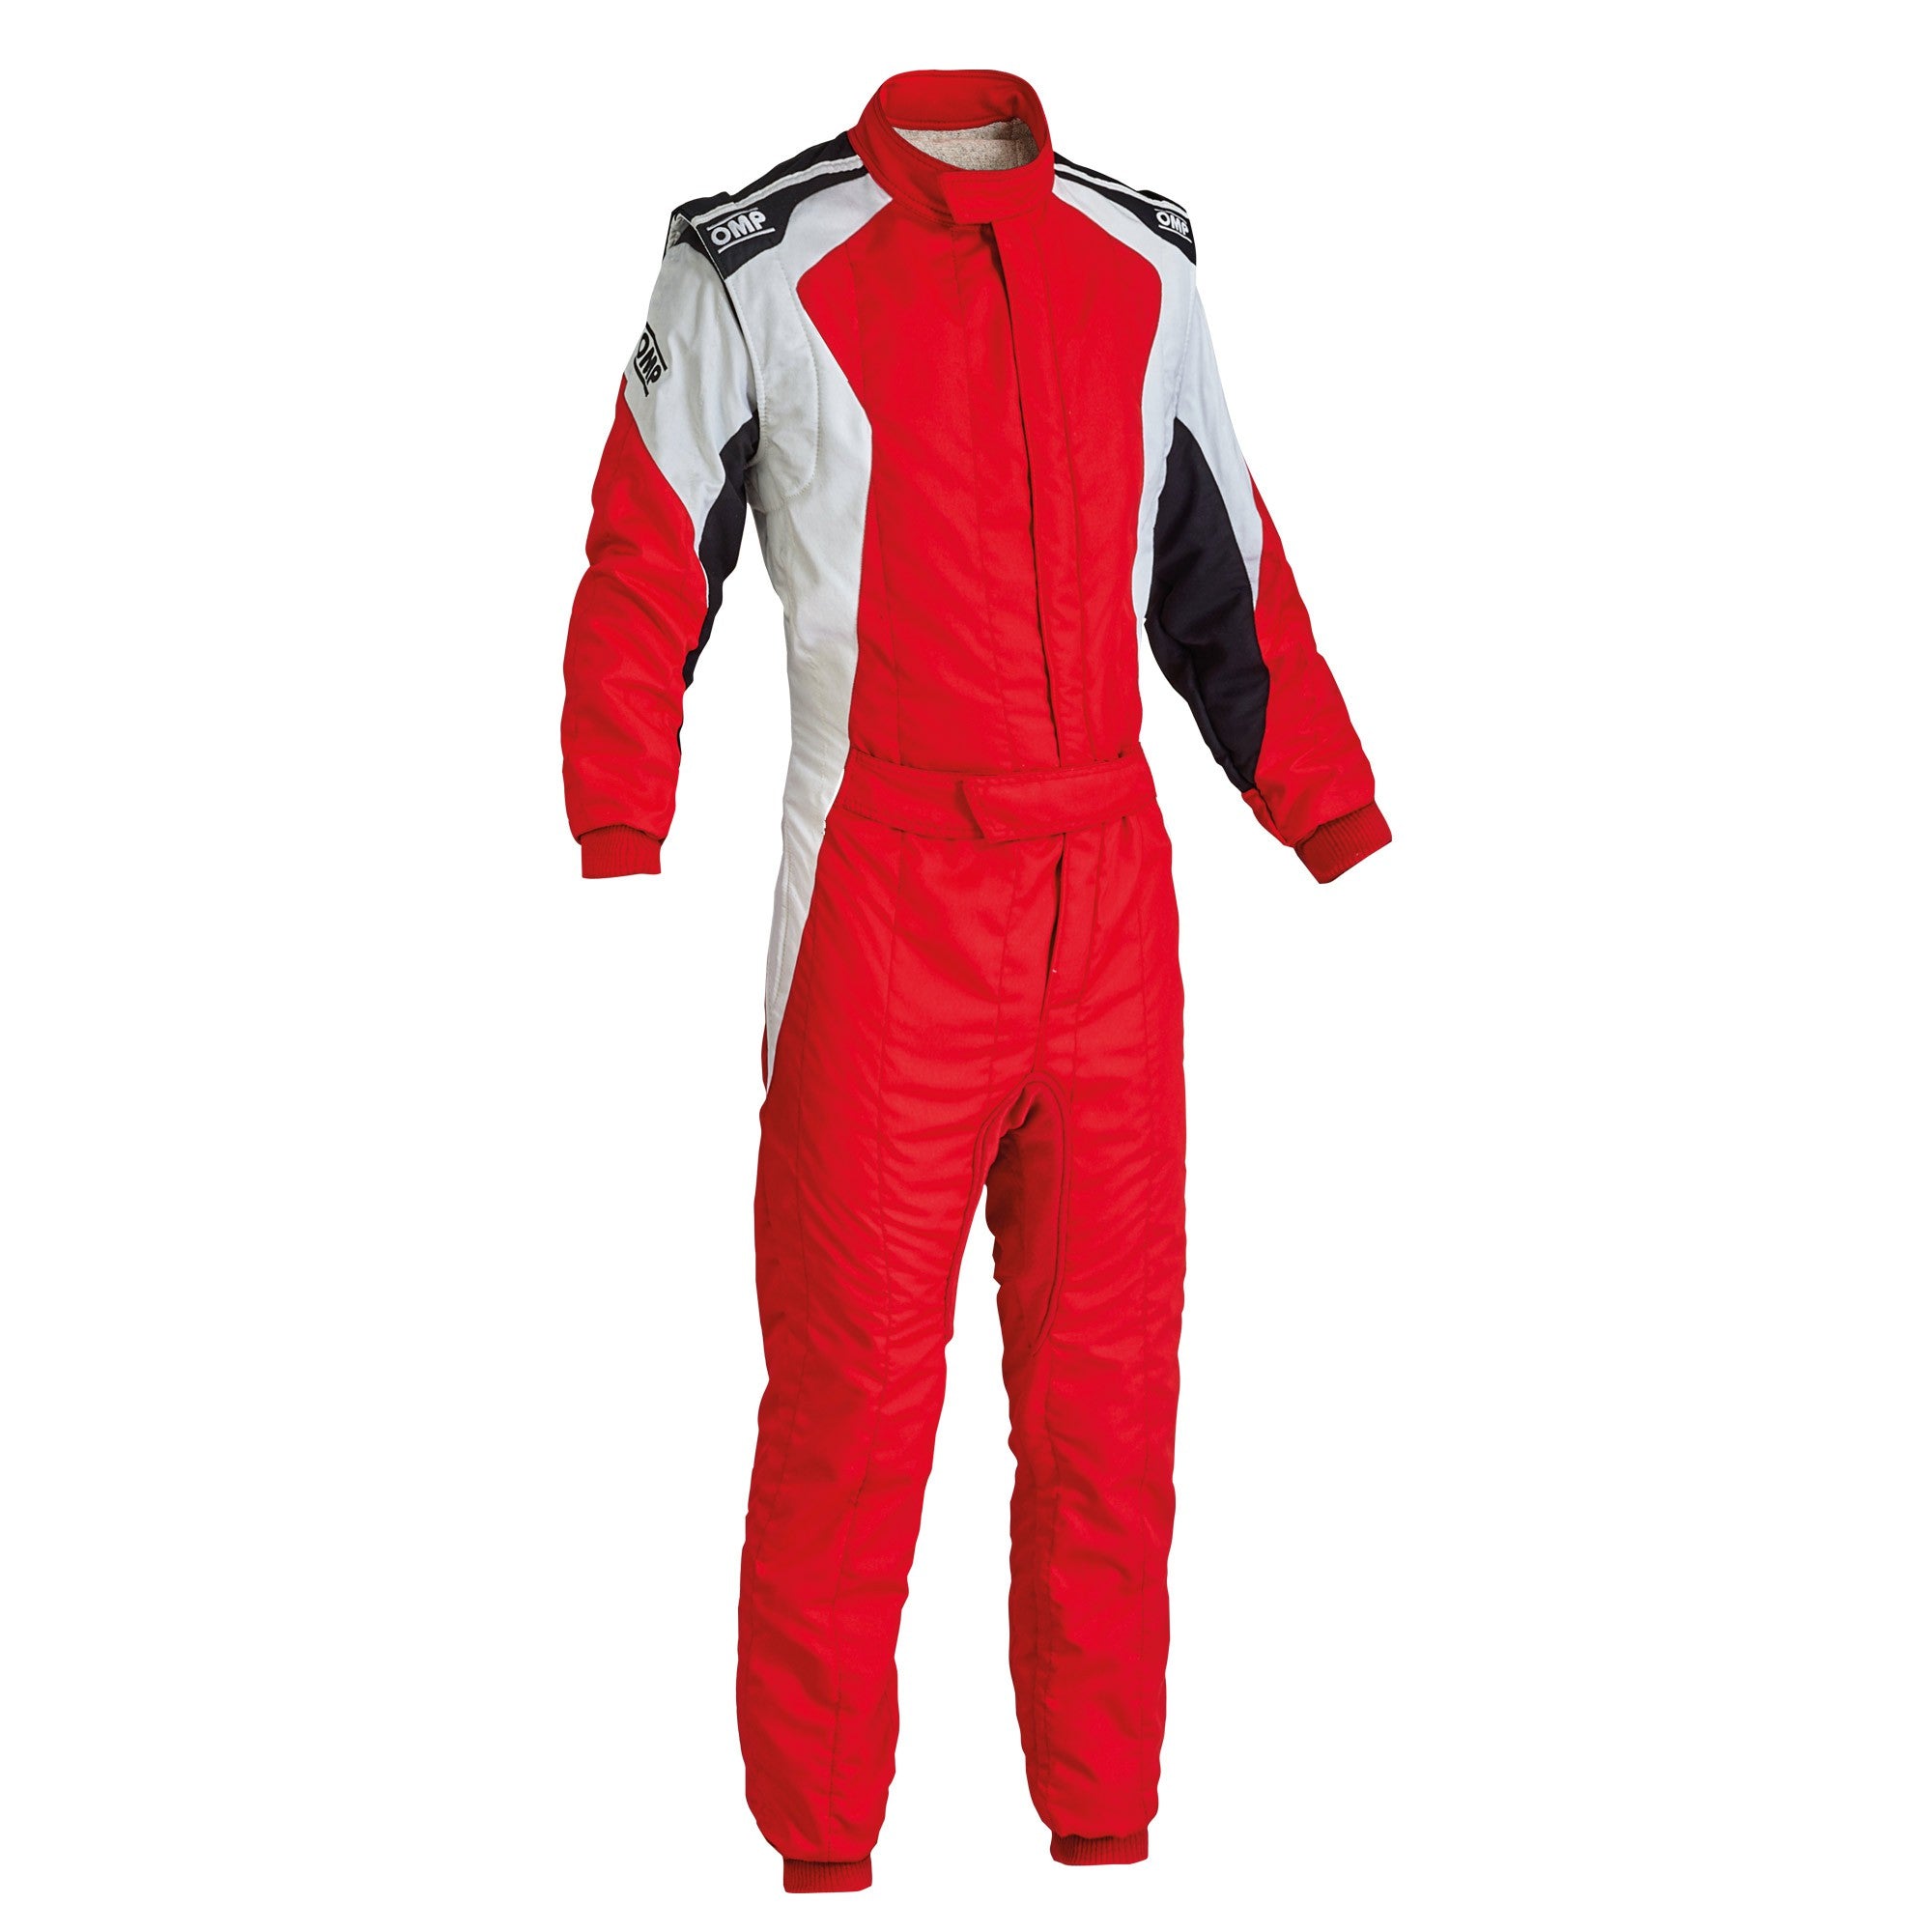 OMP IA0-1854-B01-063-42 FIRST EVO Racing suit, FIA, red/white, size 42 Photo-0 